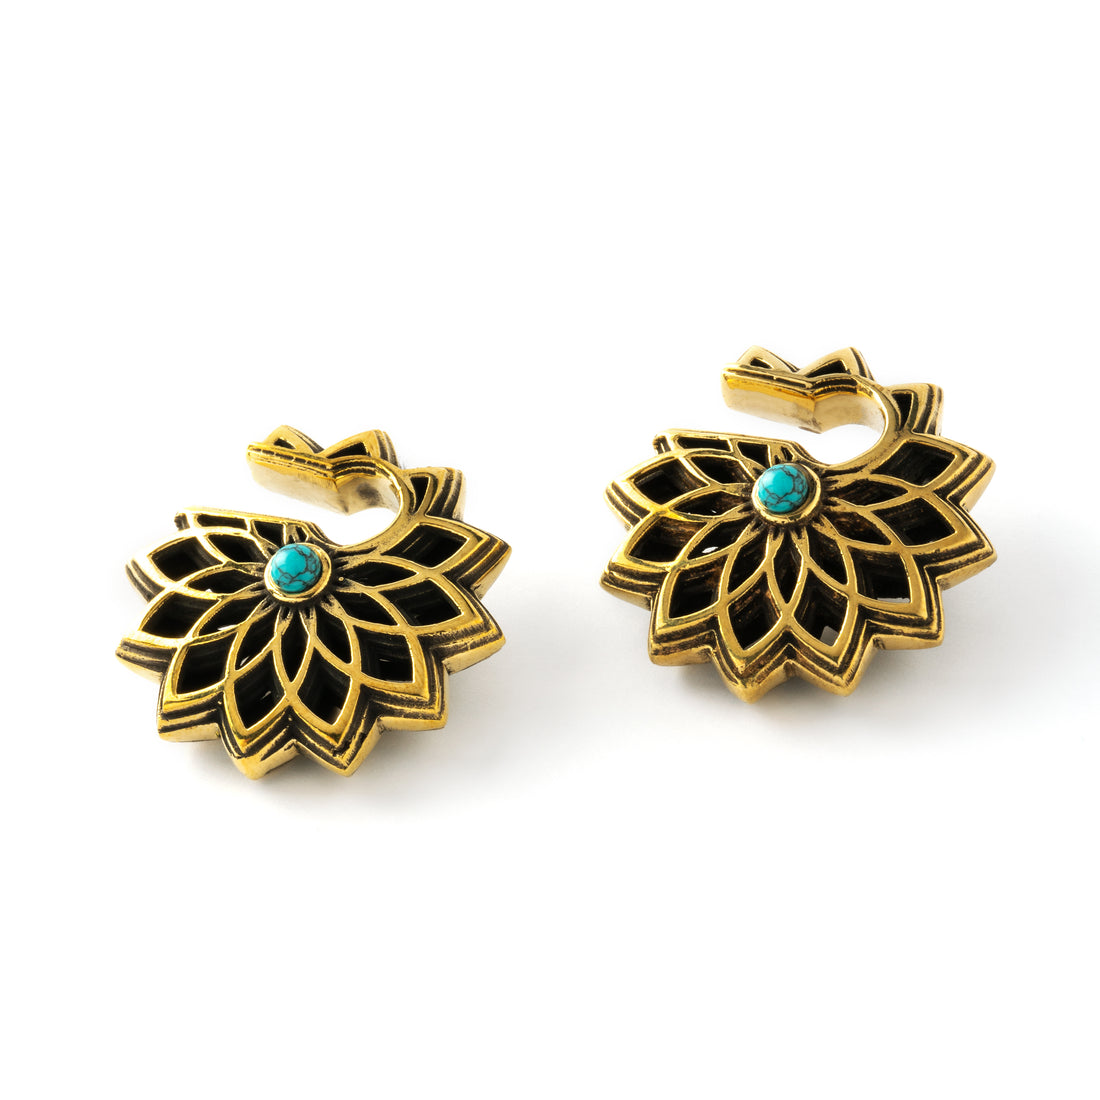 pair of antique gold colour geometric flower ear weights hangers with turquoise down view